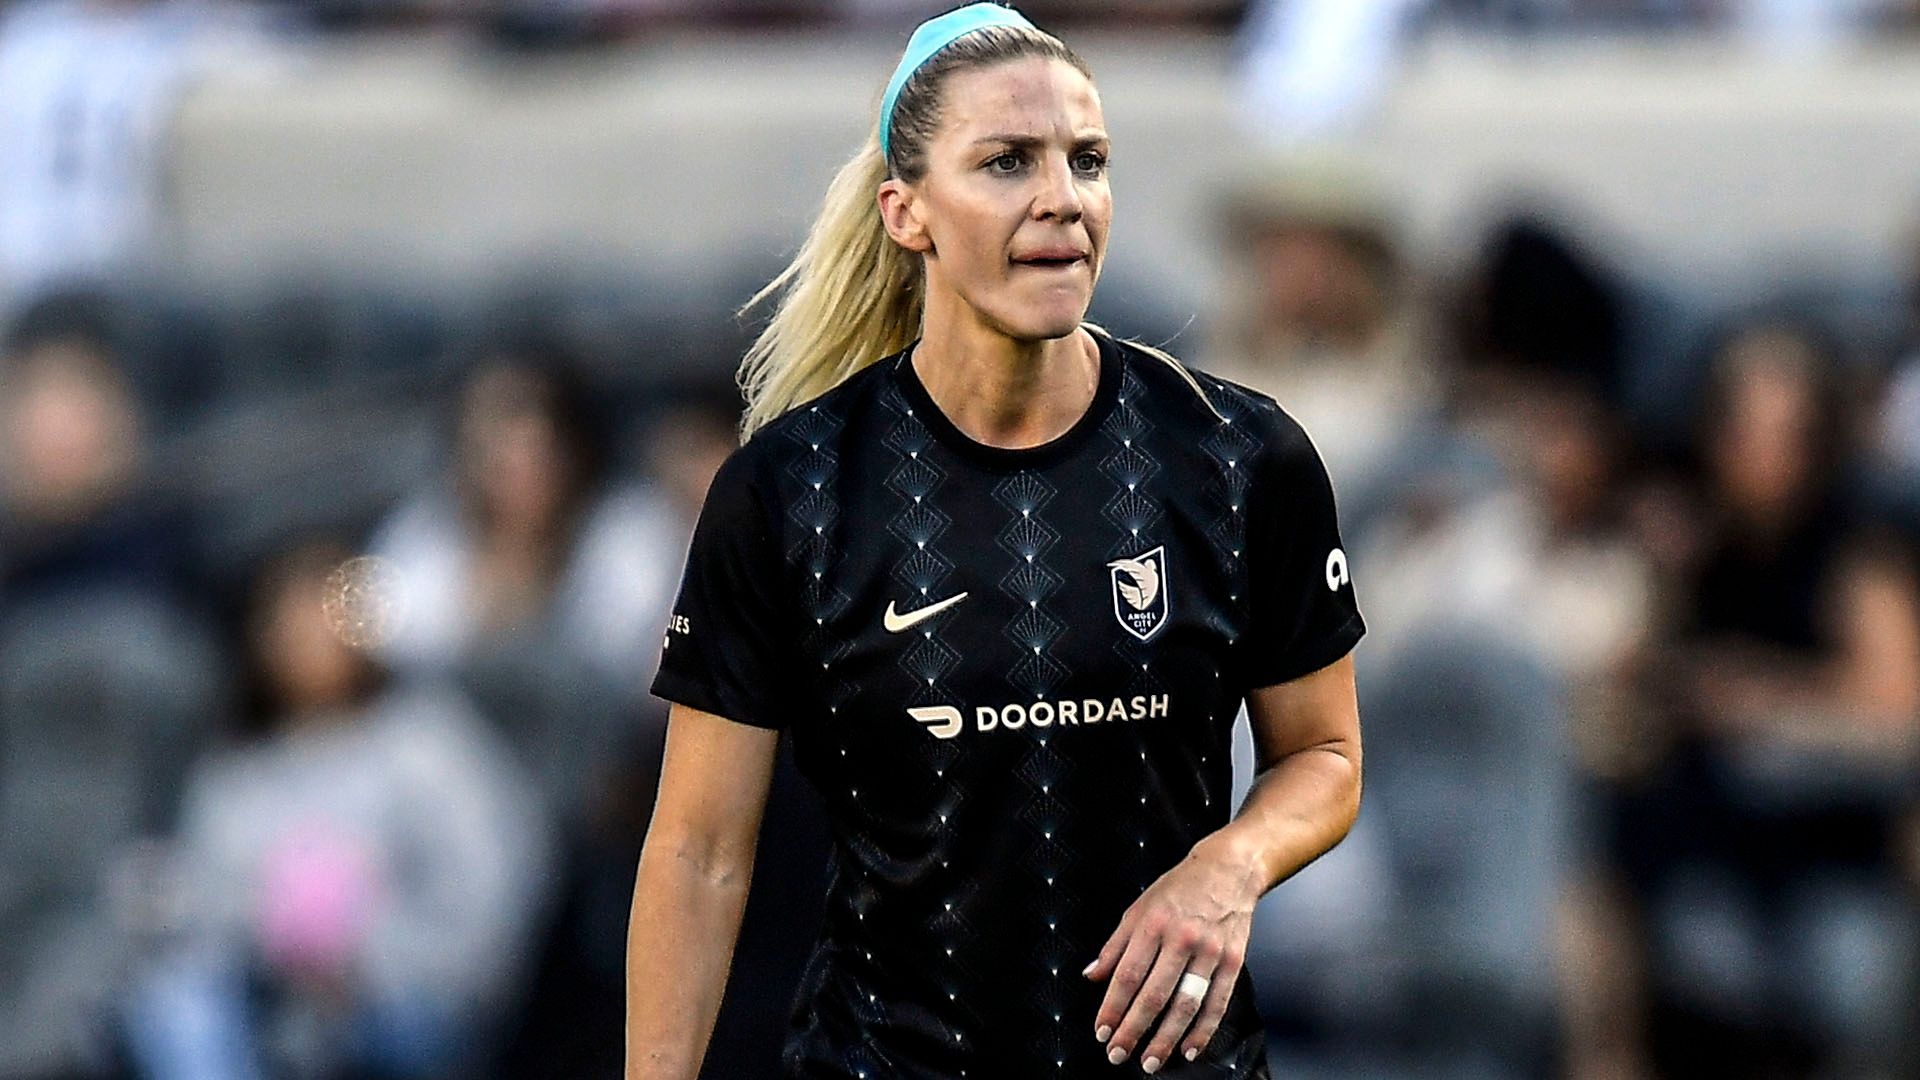 We're able to play a different style' - Julie Ertz's potential 